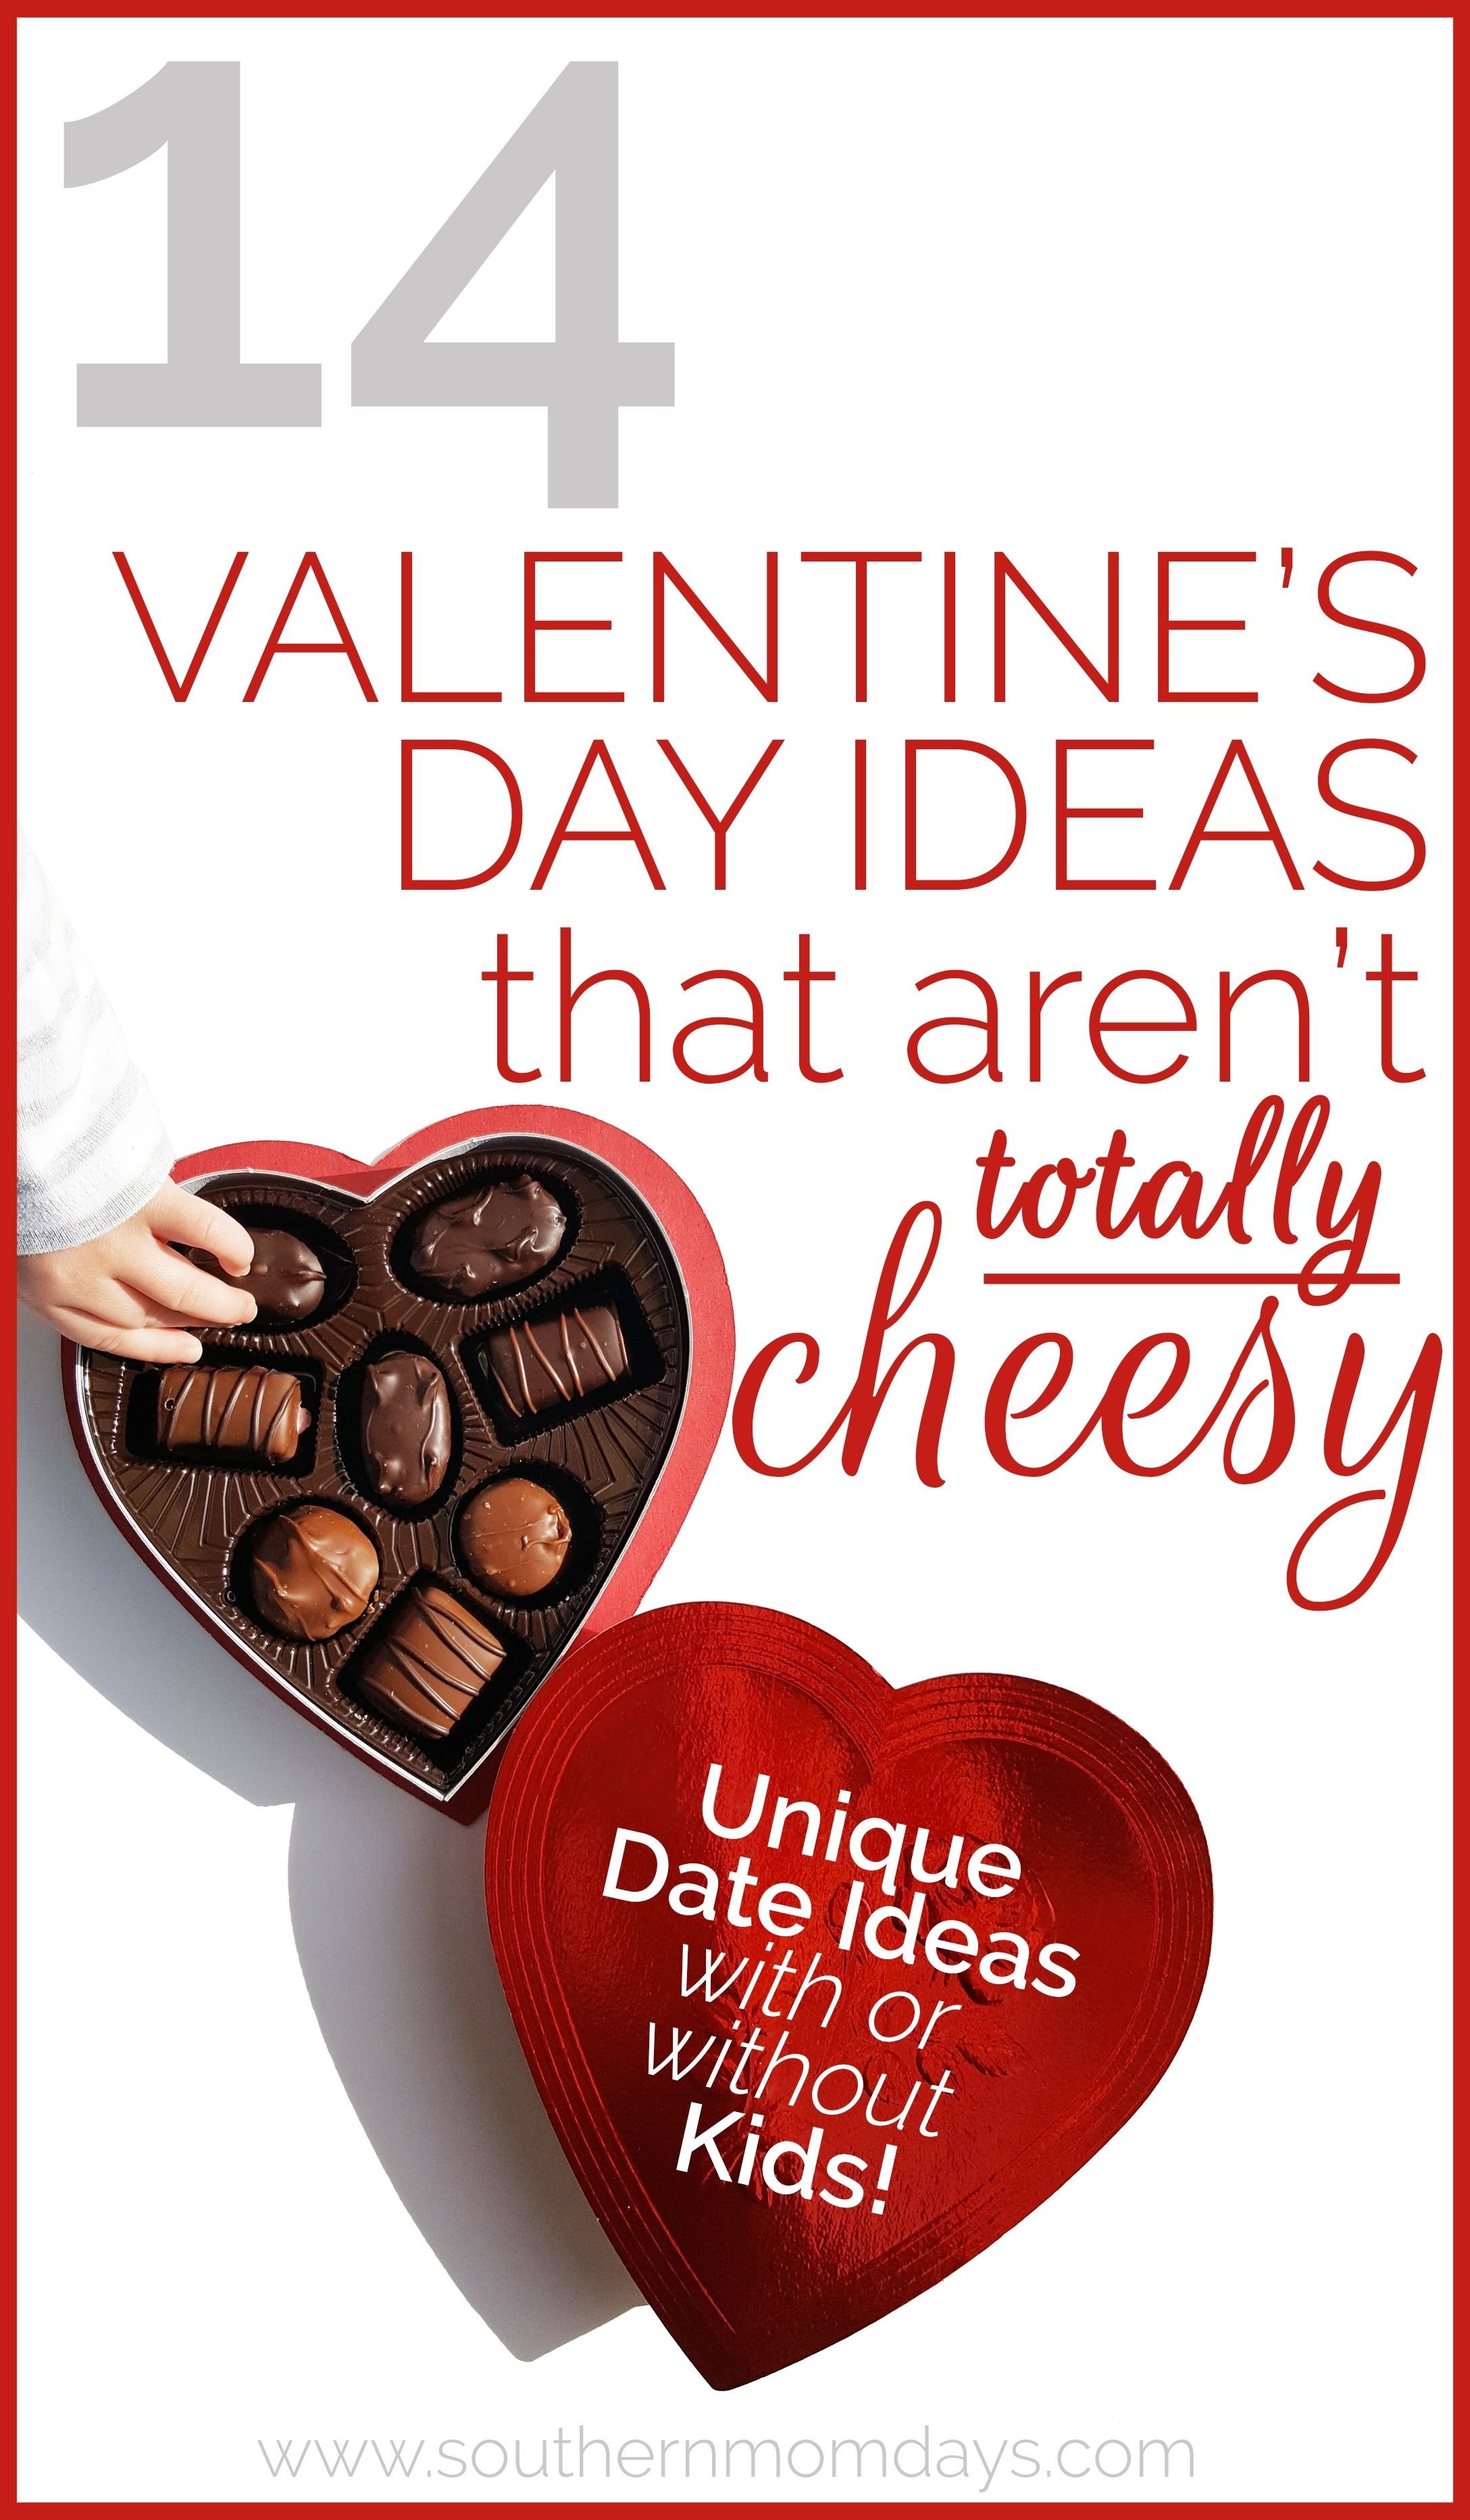 10 Nice Unique Valentines Day Date Ideas 14 valentines day ideas that arent totally cheesy 1 2023